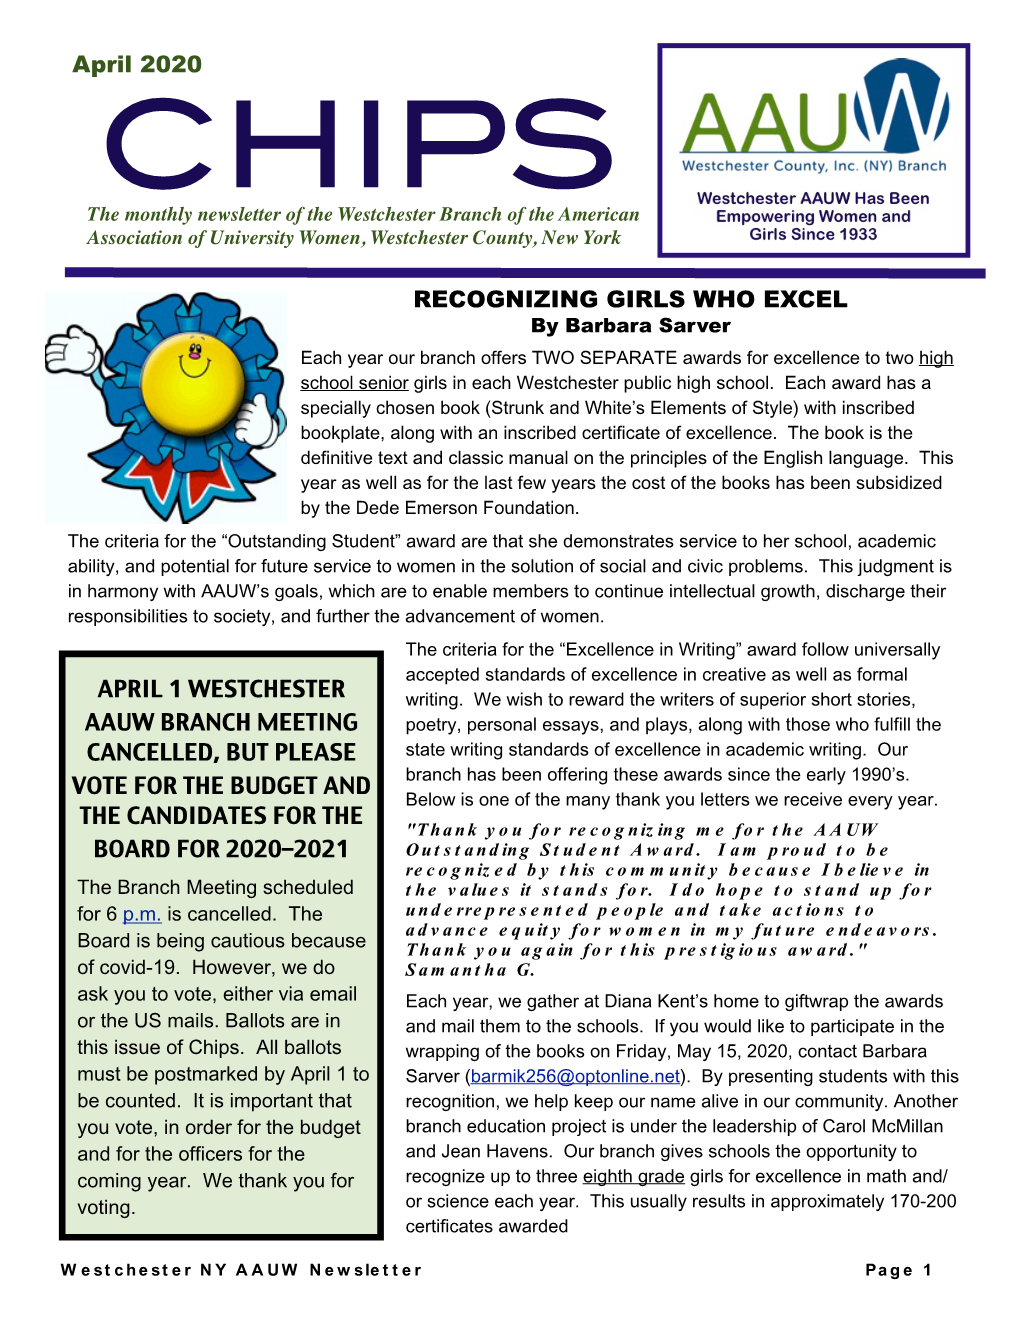 April 2020 CHIPS the Monthly Newsletter of the Westchester Branch of the American Association of University Women, Westchester County, New York